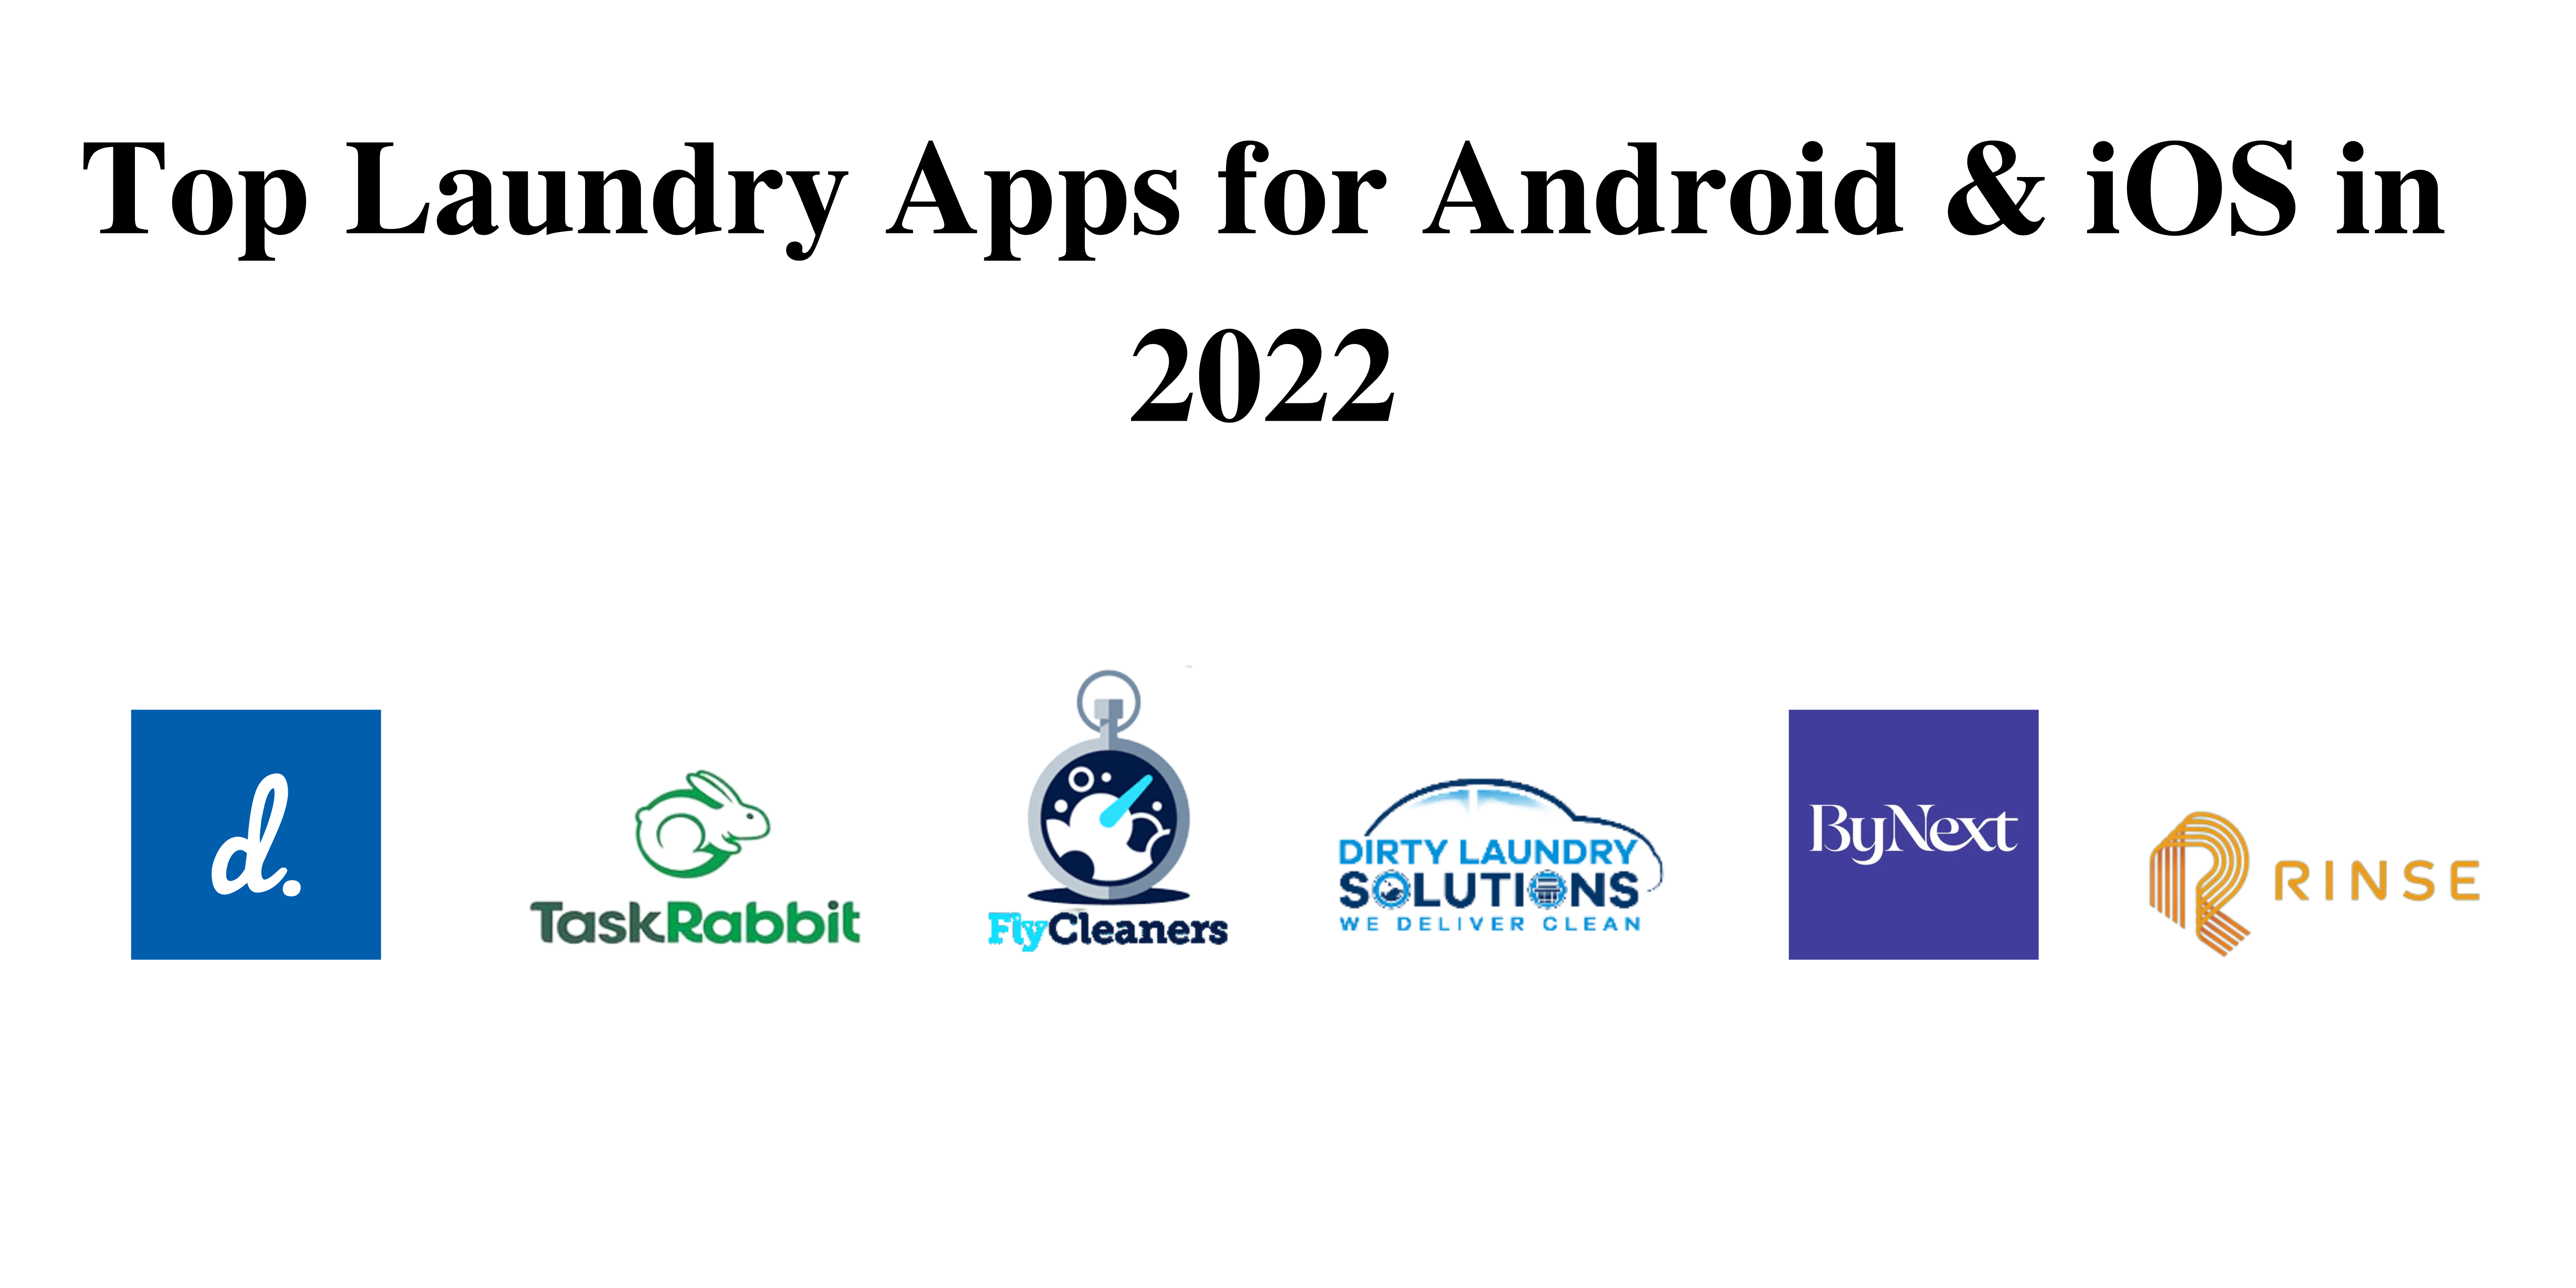 Top Laundry Apps for Android iOS in 2022